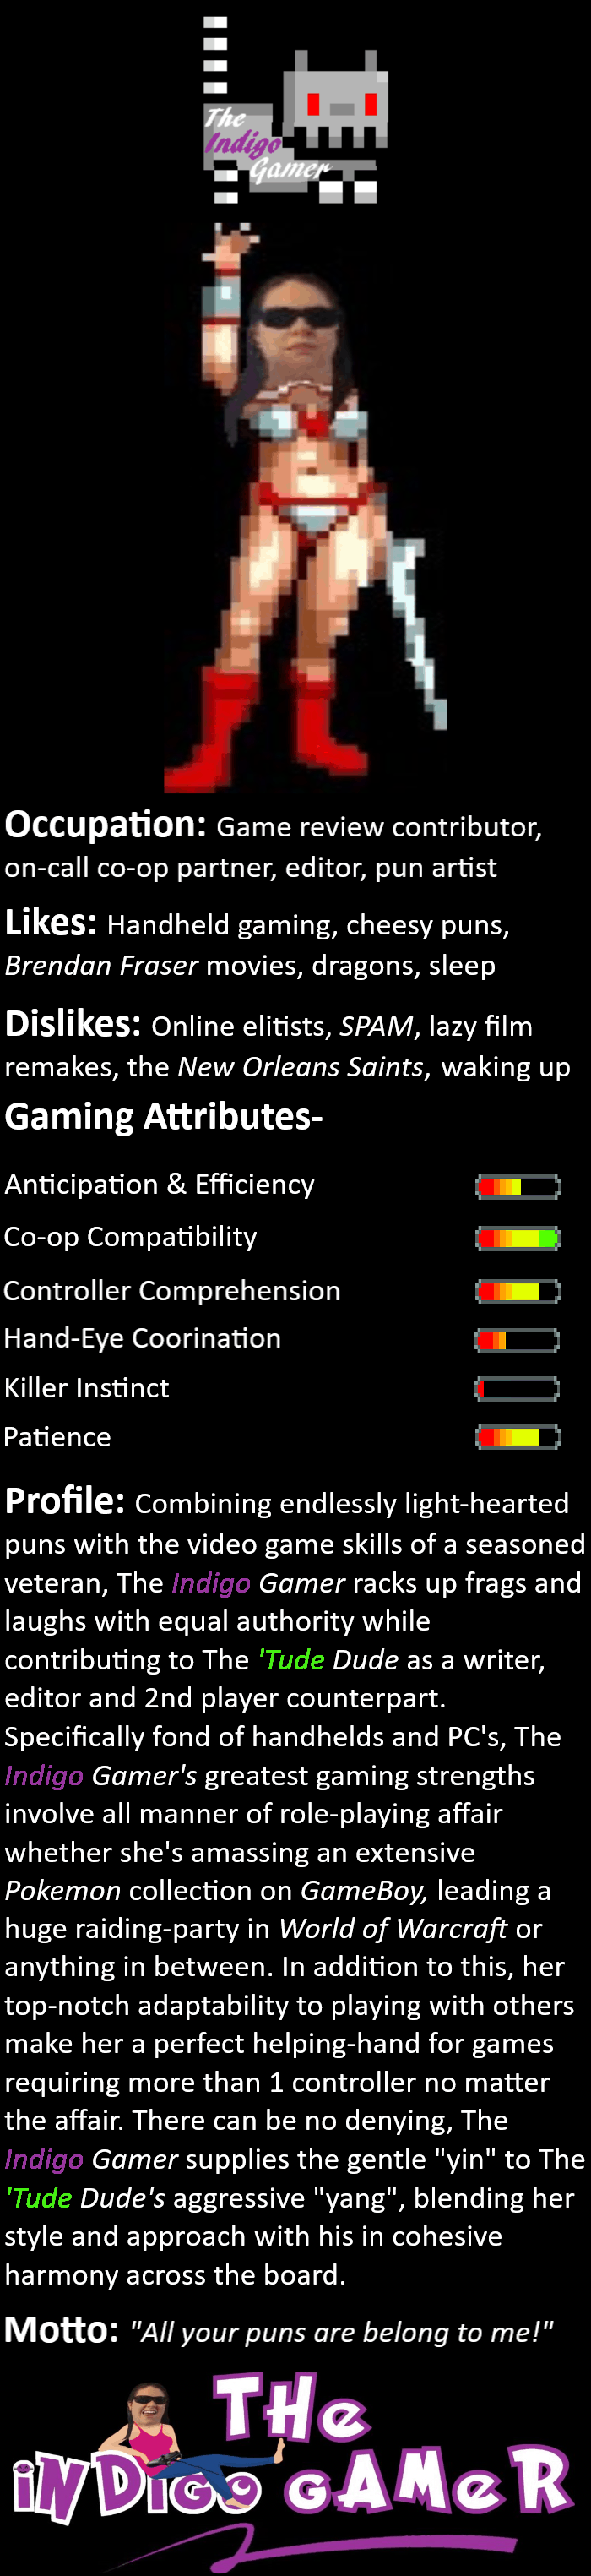 The Indigo Gamer Biography - A brief summary of The Indigo Gamer's overall credentials. Refer to the About The 'Tude Dude page for more information.